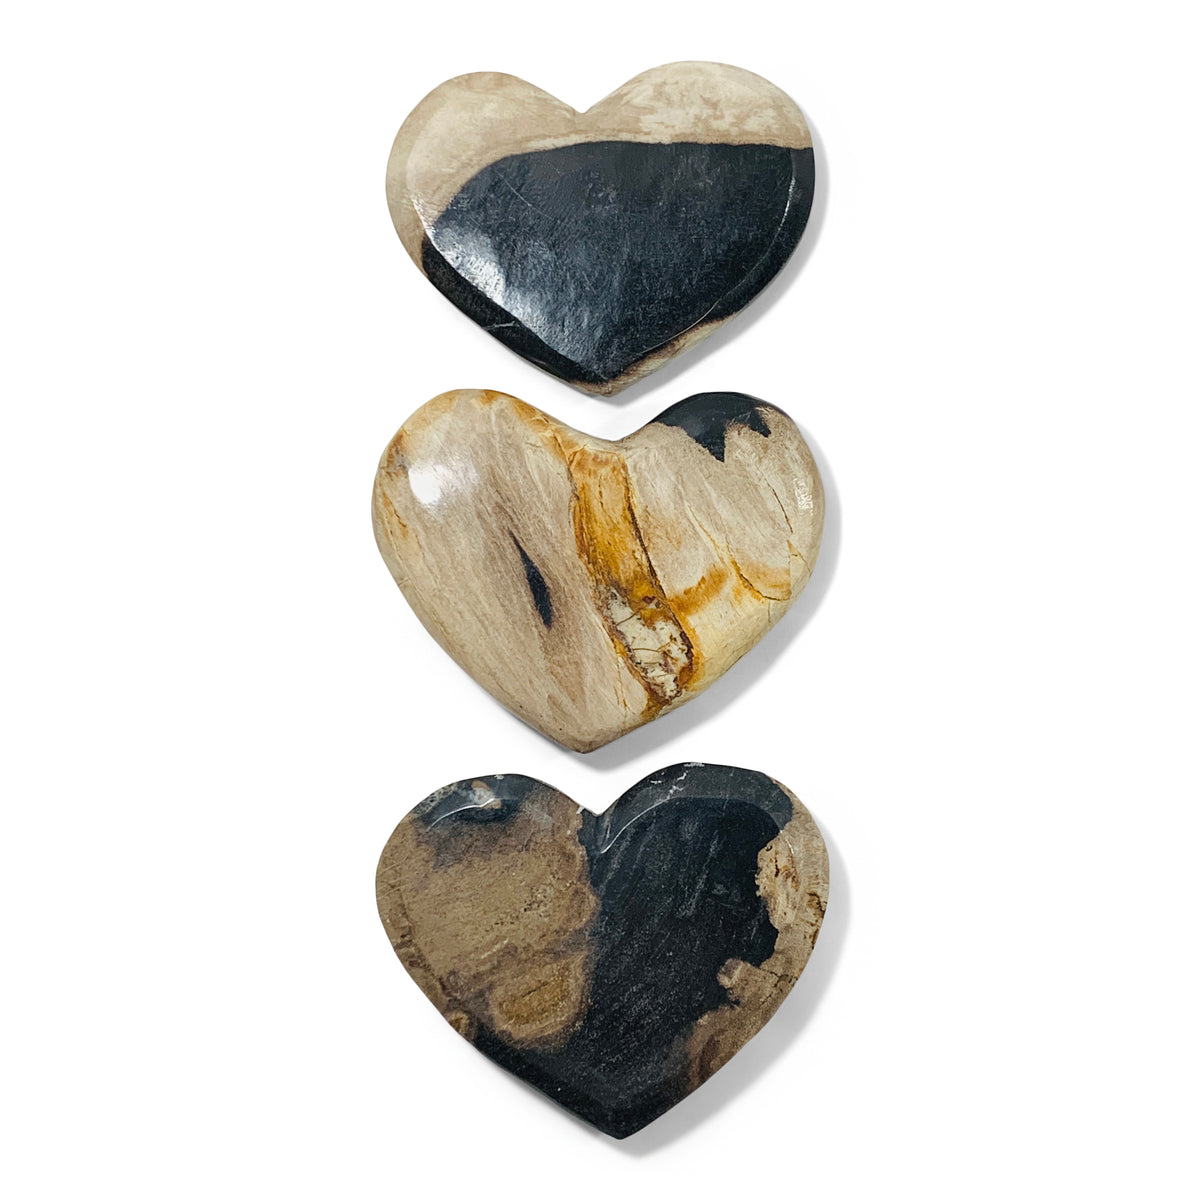 Fossil Wood Hearts  Buy Petrified Wood Online